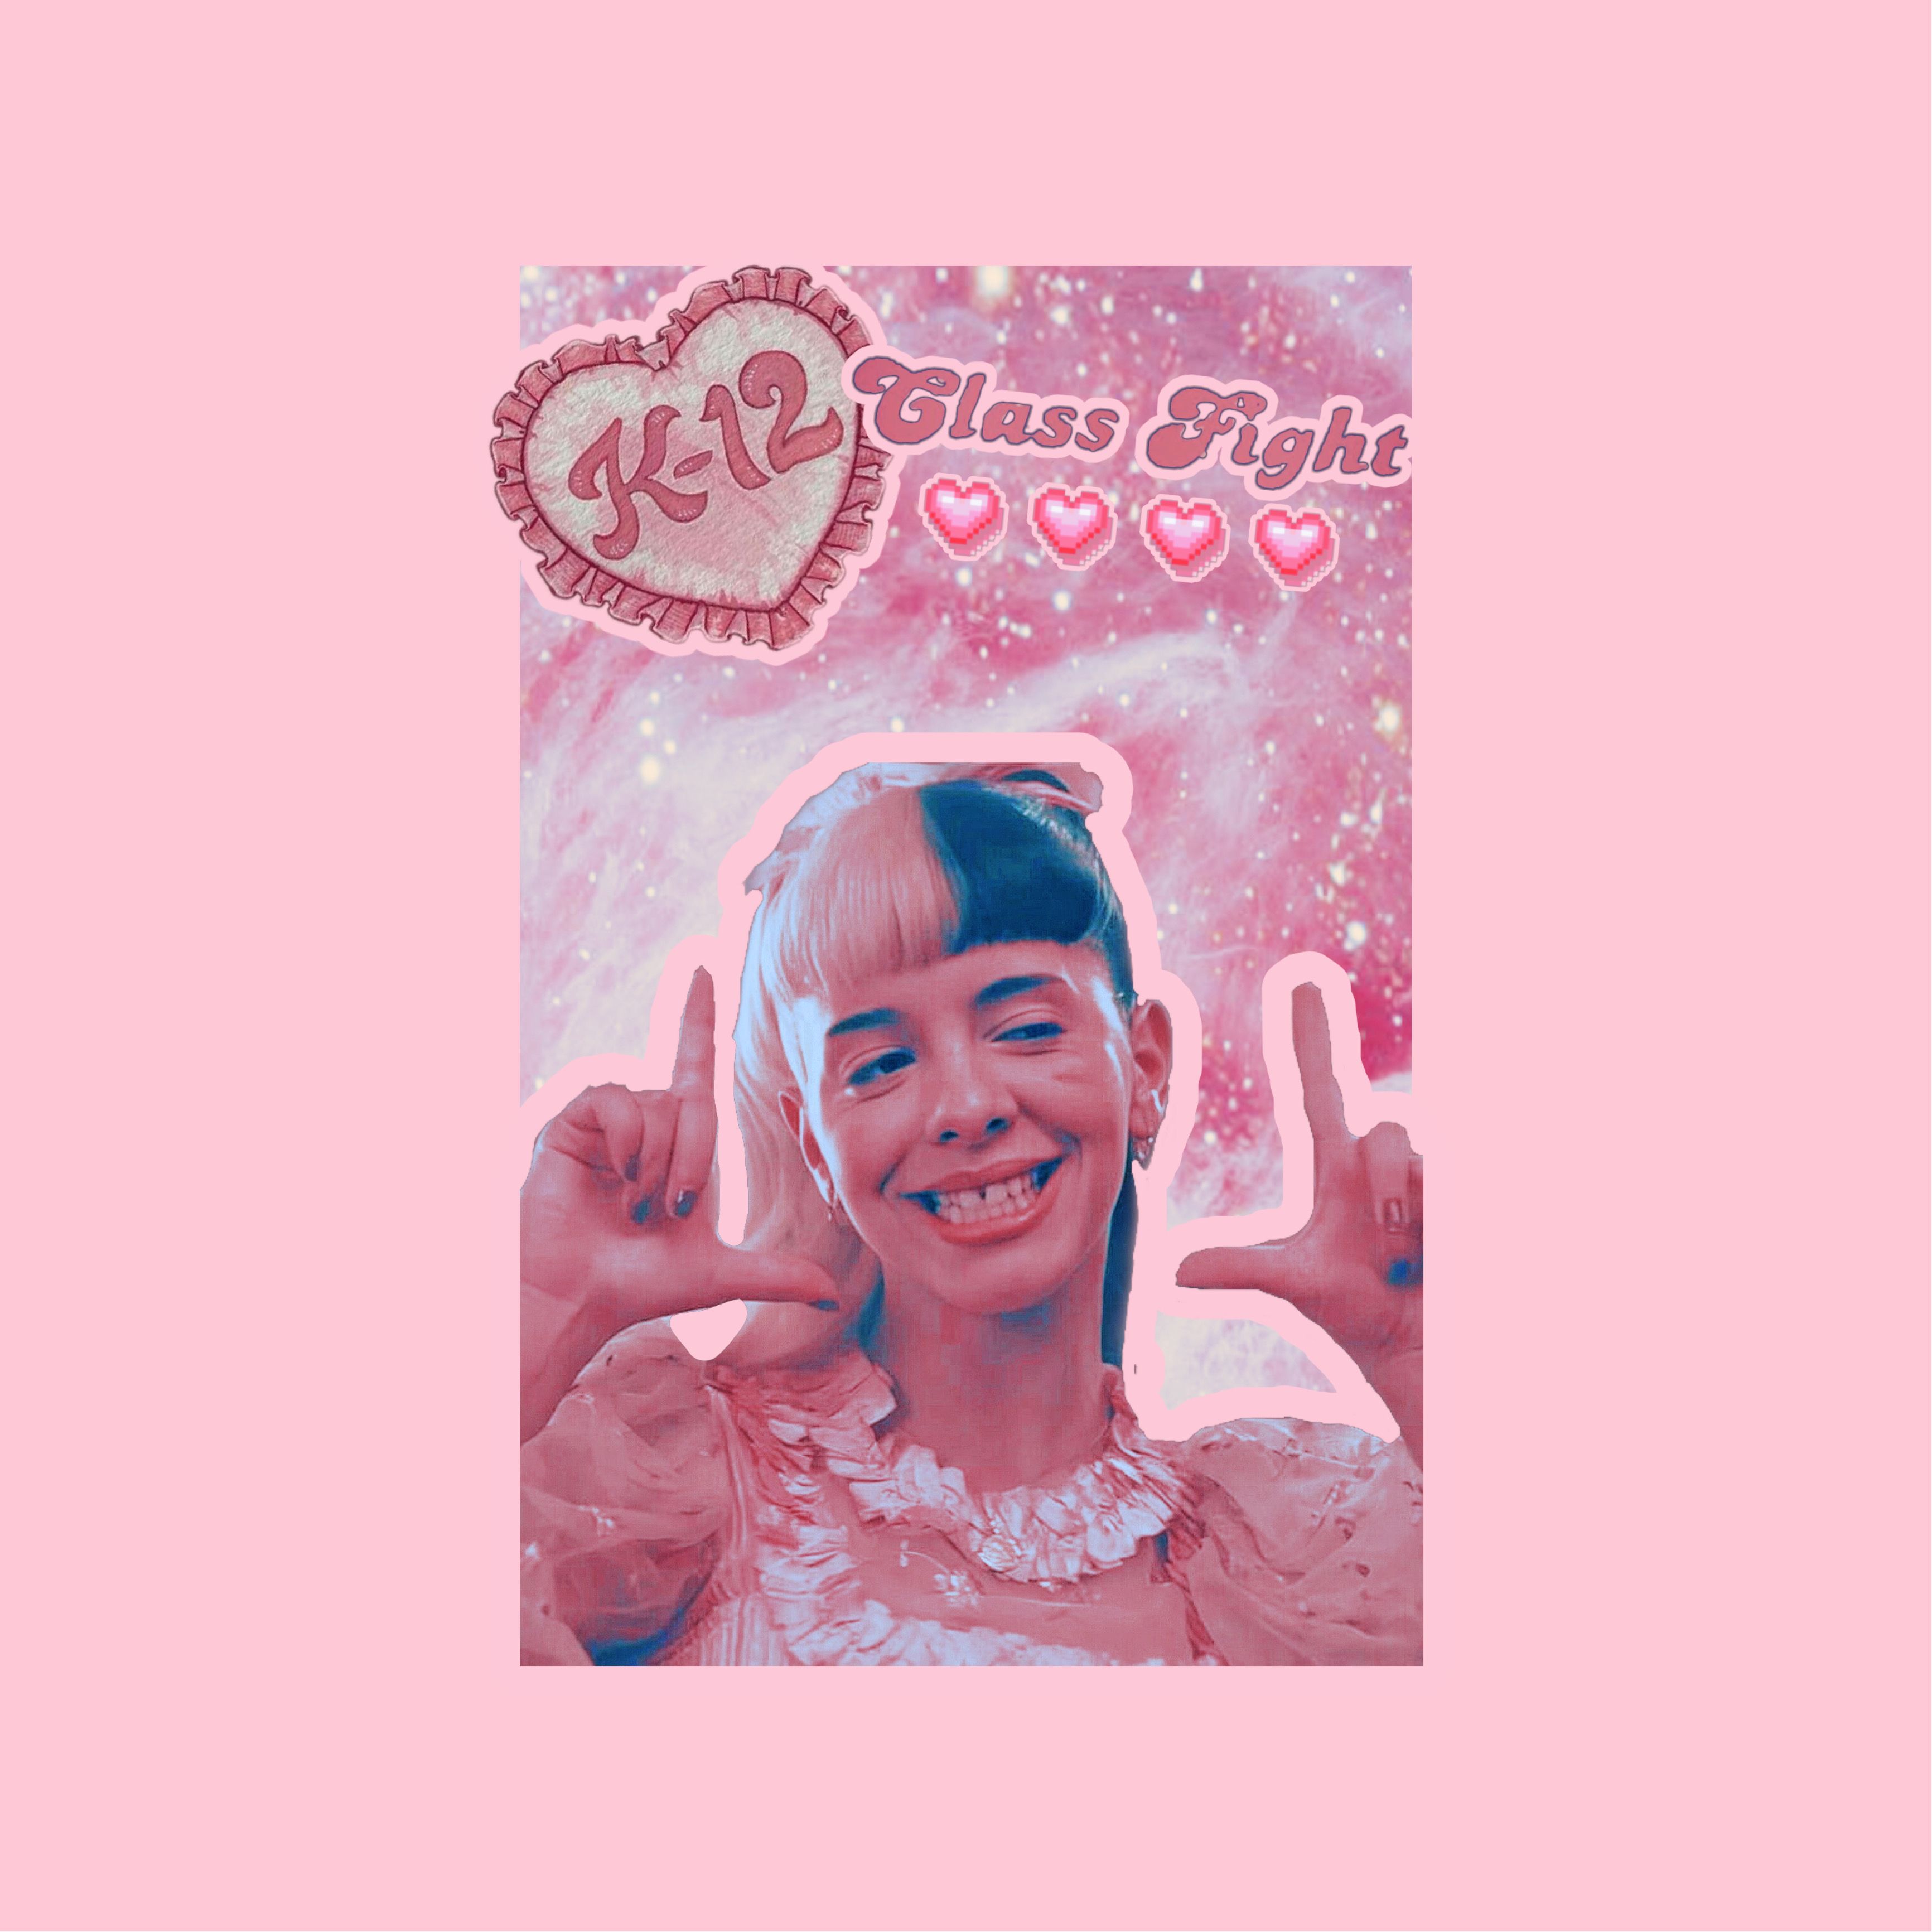 Collection 93 Wallpaper Melanie Martinez Portals Wallpaper Completed